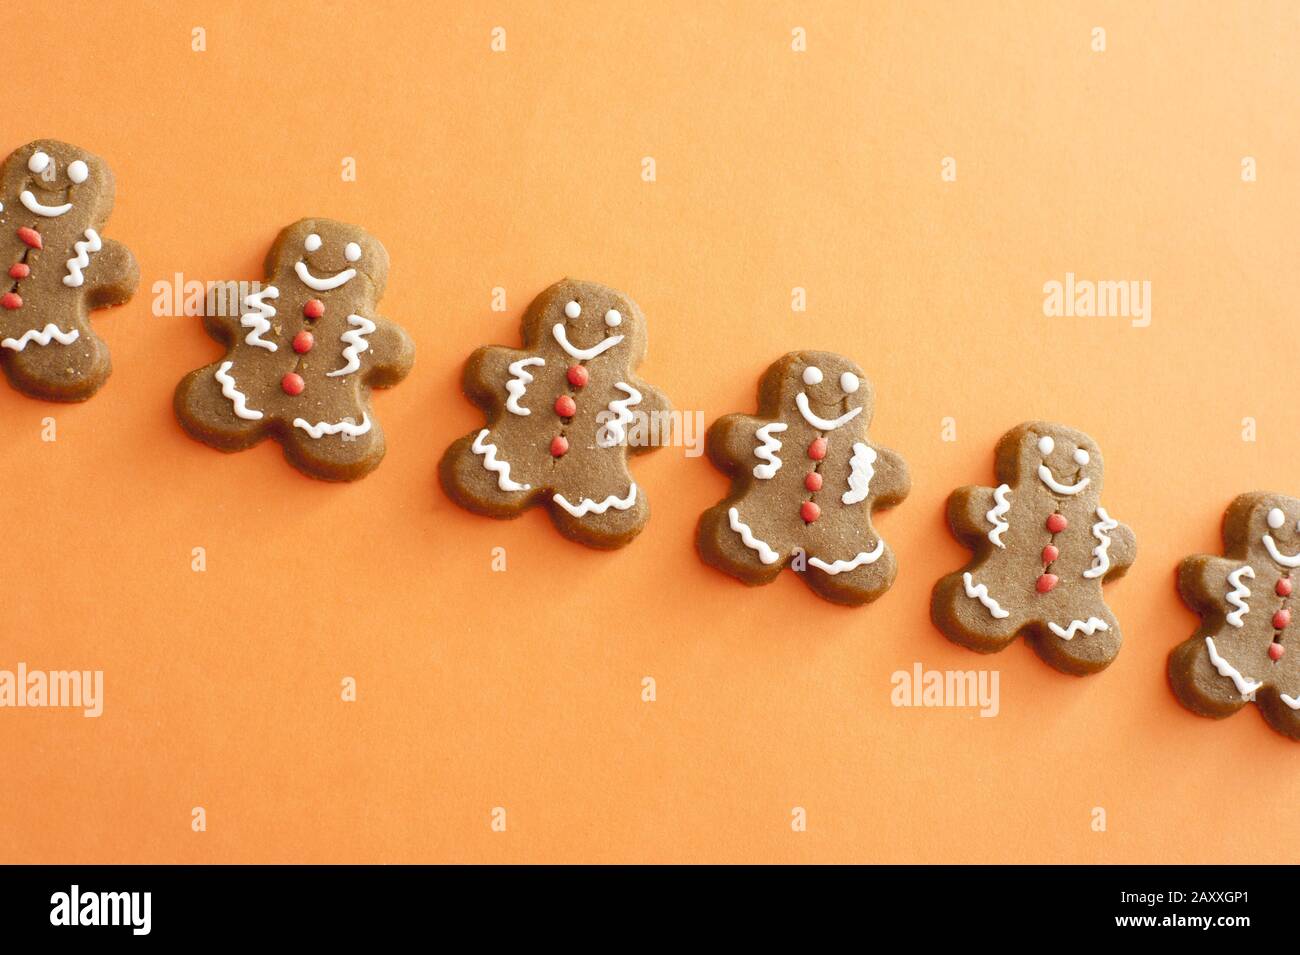 Single line of smiling gingerbread men cookies with white and red candy decorations detailing the face, arms and legs Stock Photo